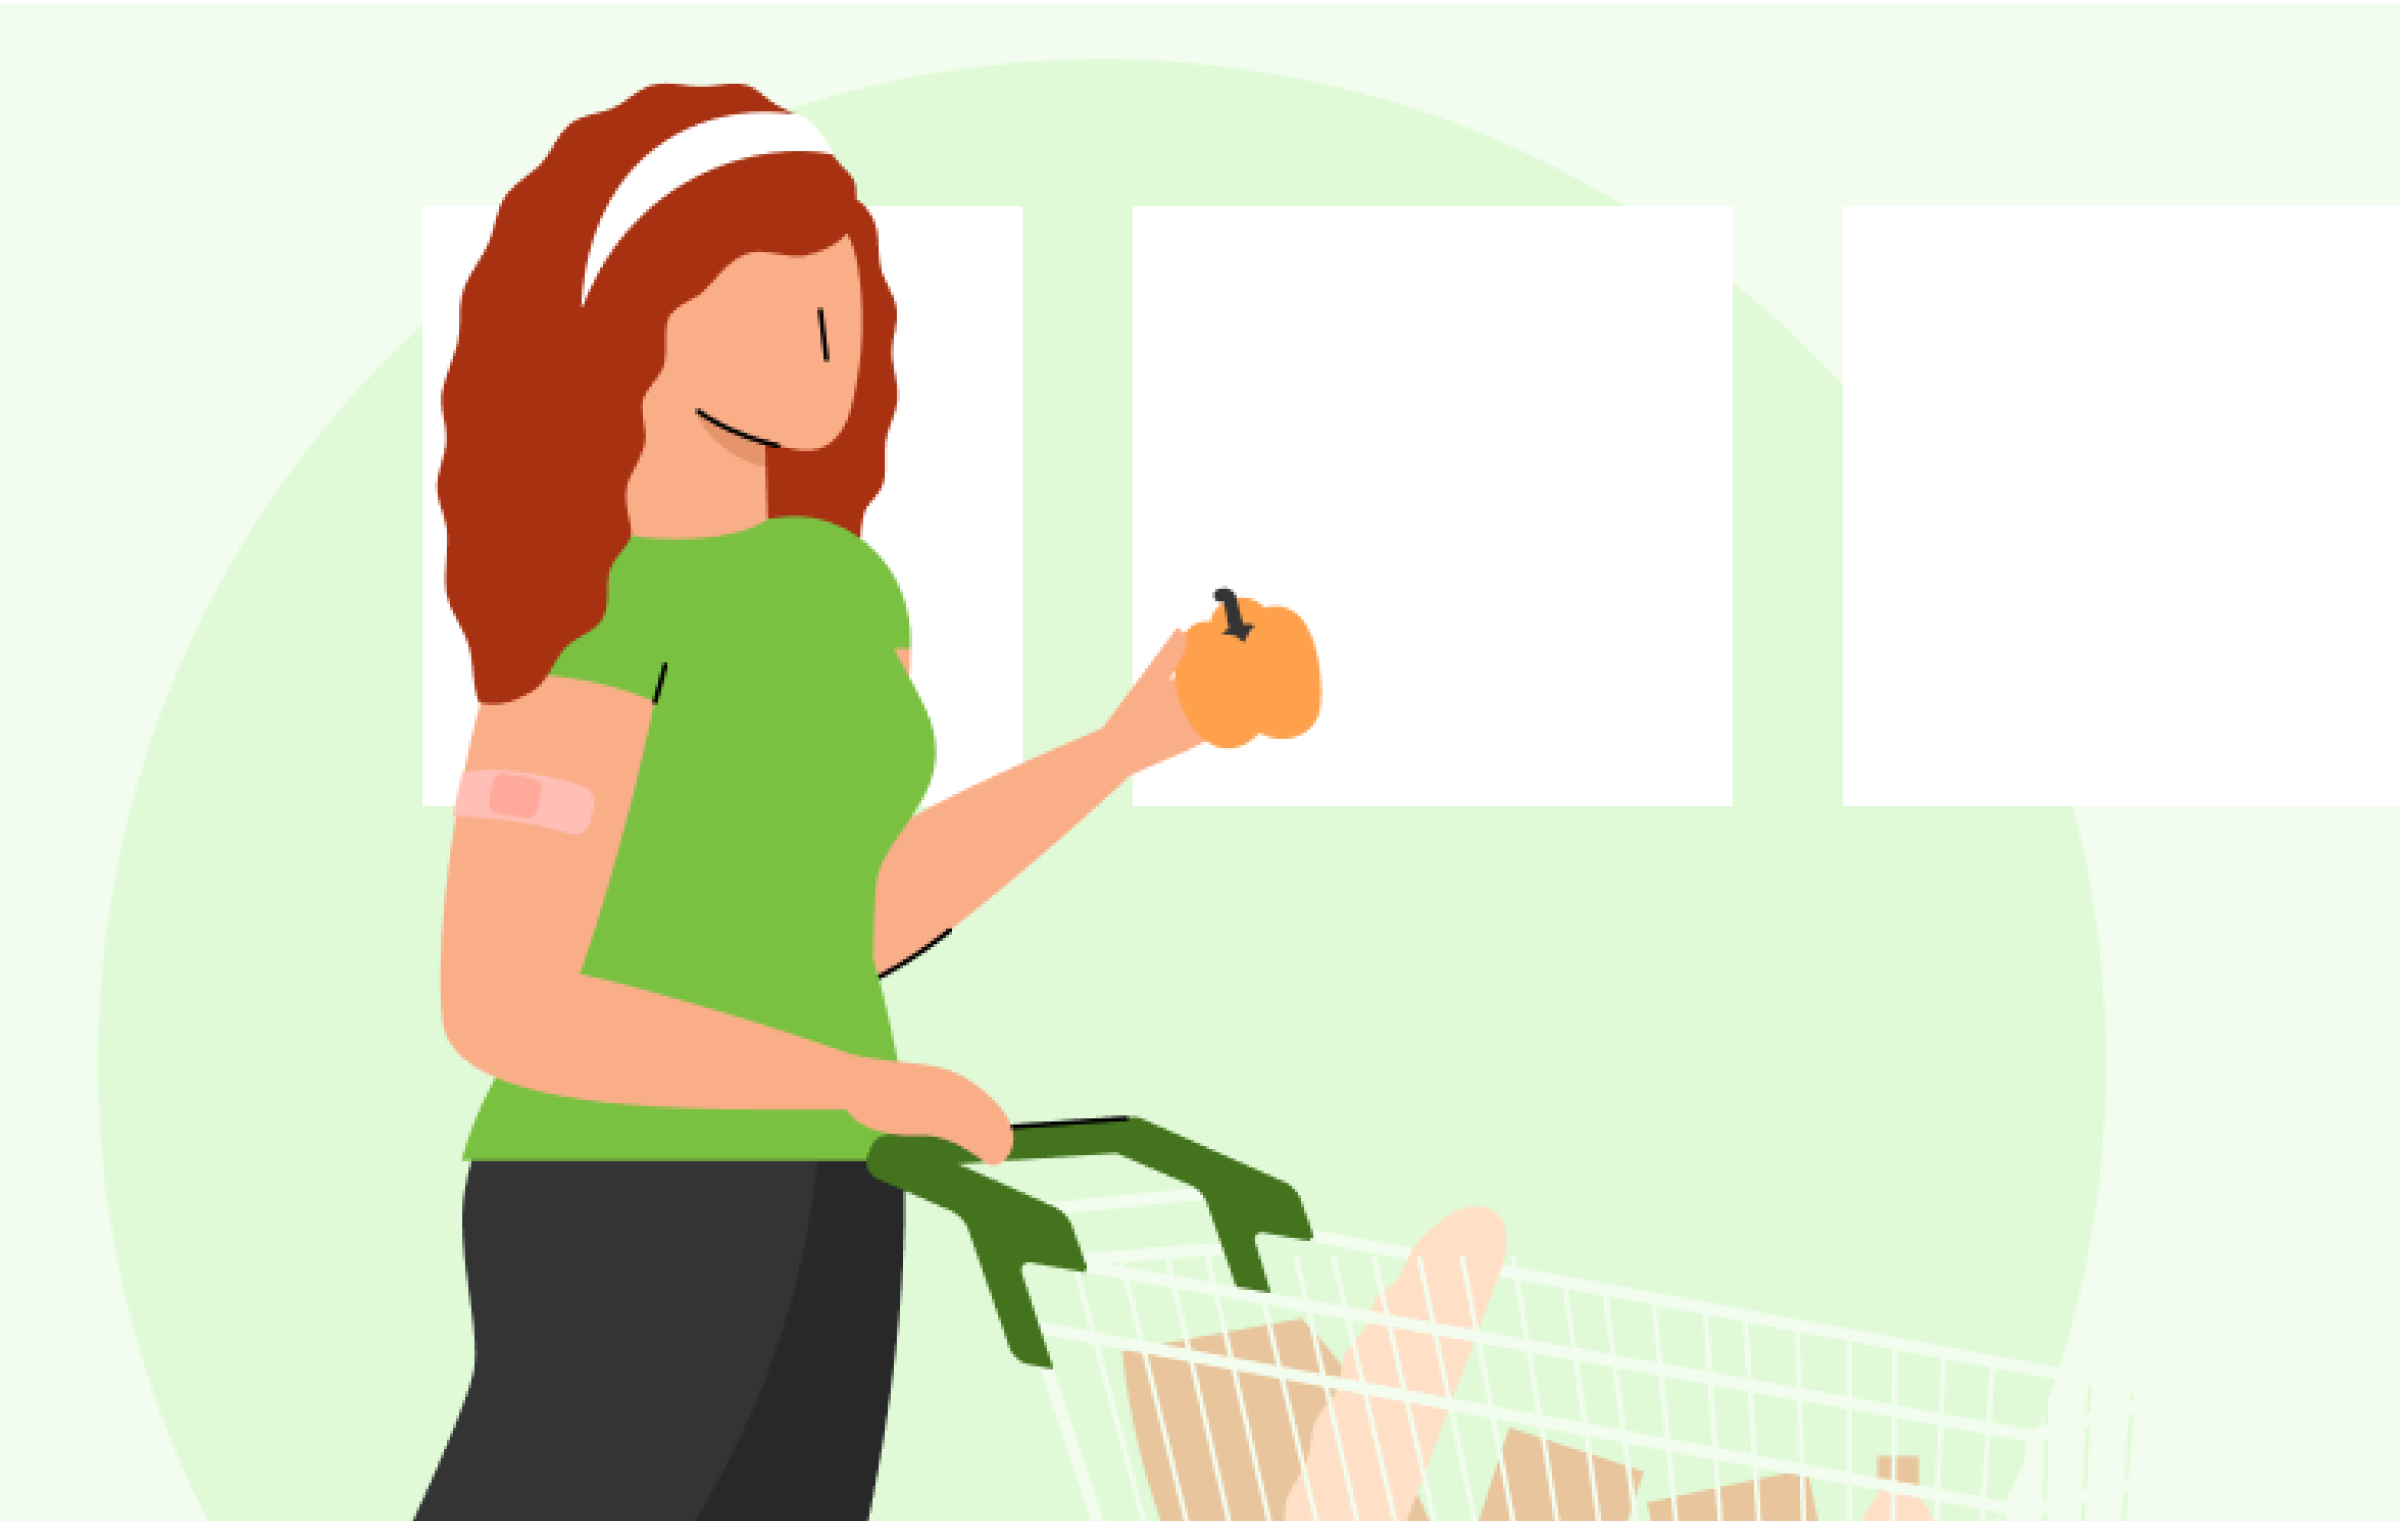 Illustration of a woman shopping for groceries pushing a basket